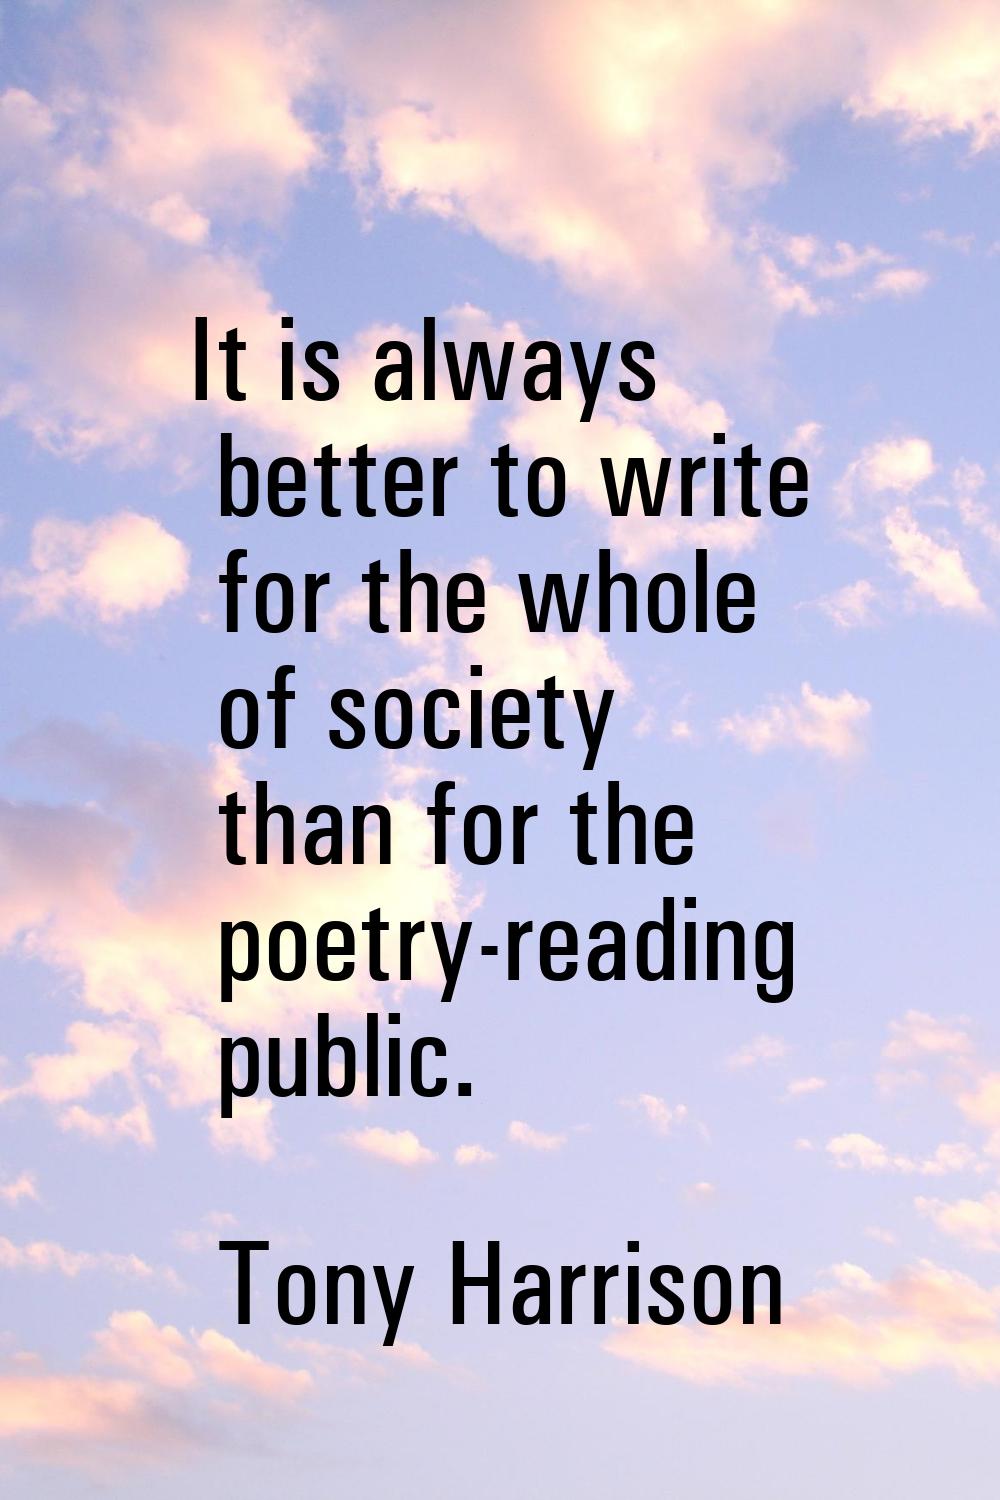 It is always better to write for the whole of society than for the poetry-reading public.